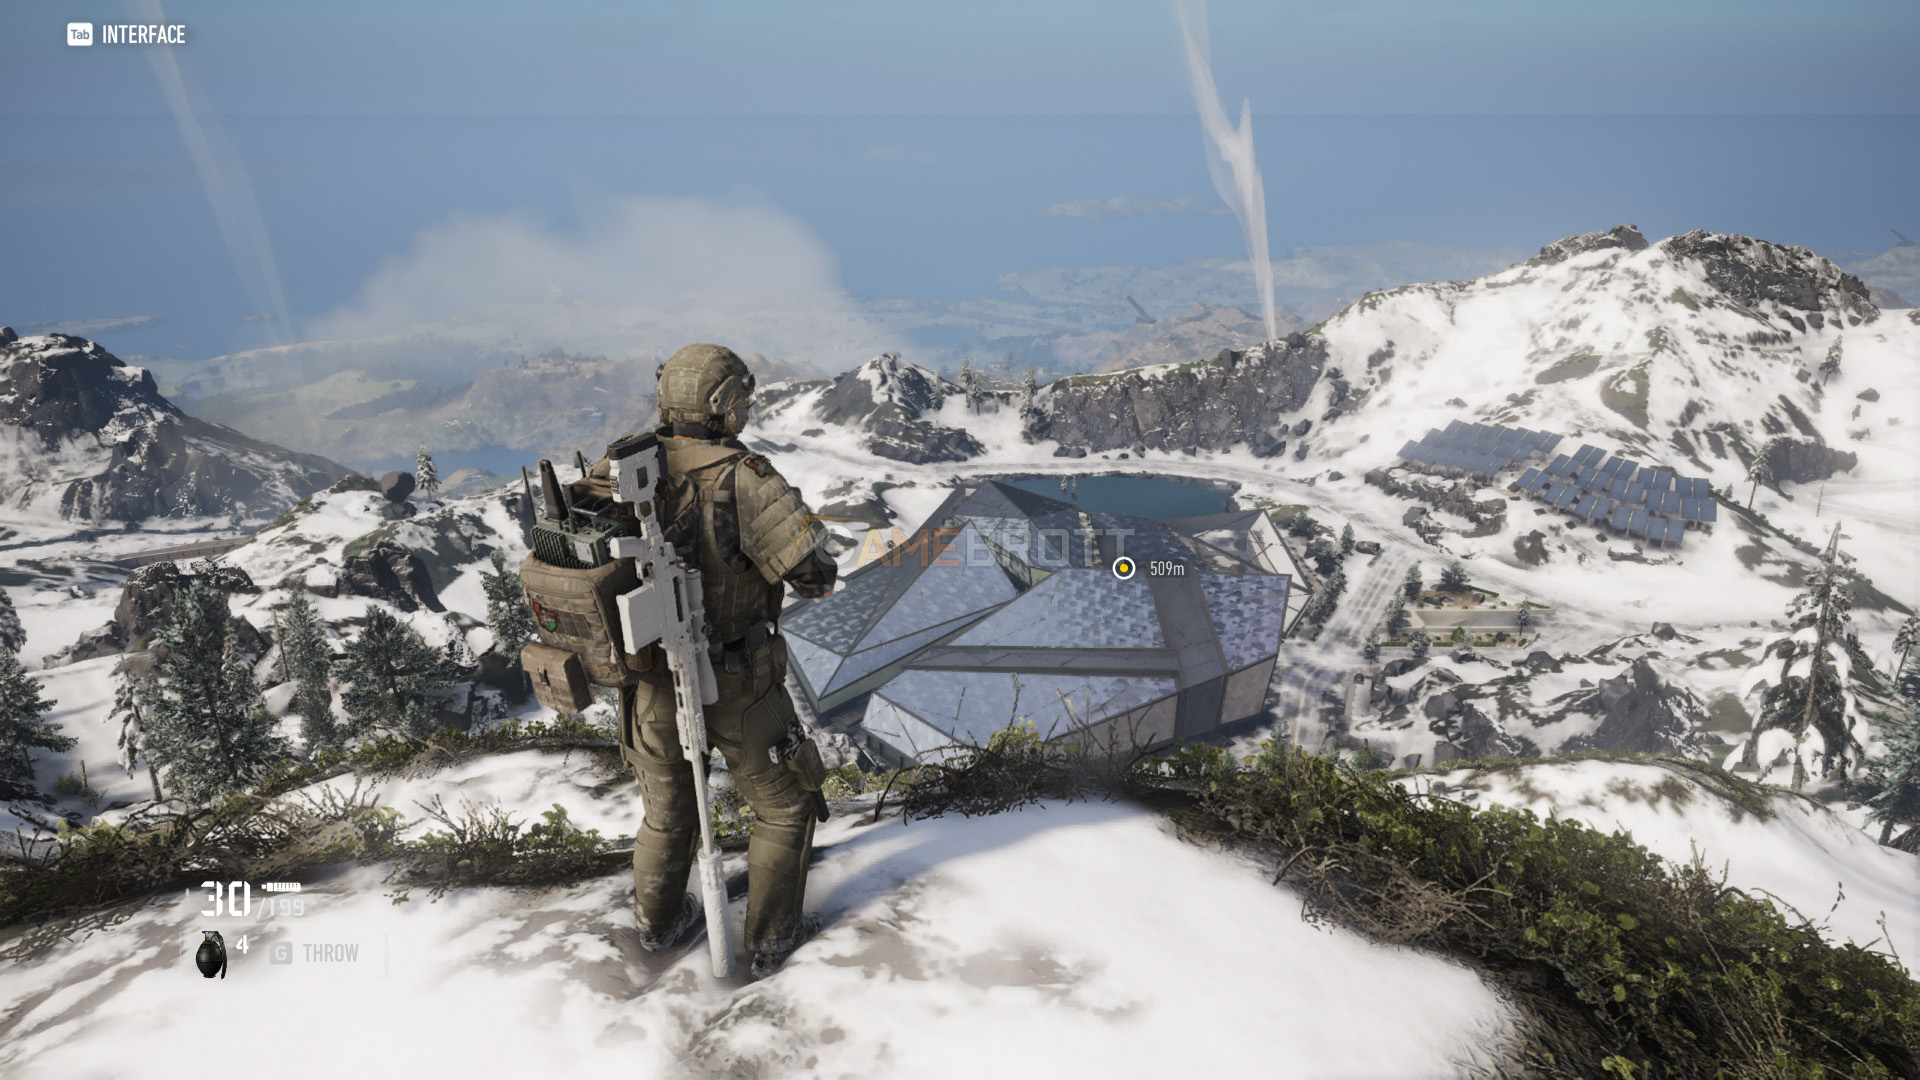 Tom Clancys Ghost Recon Breakpoint Screenshot 2019.10.05 13.42.52.64